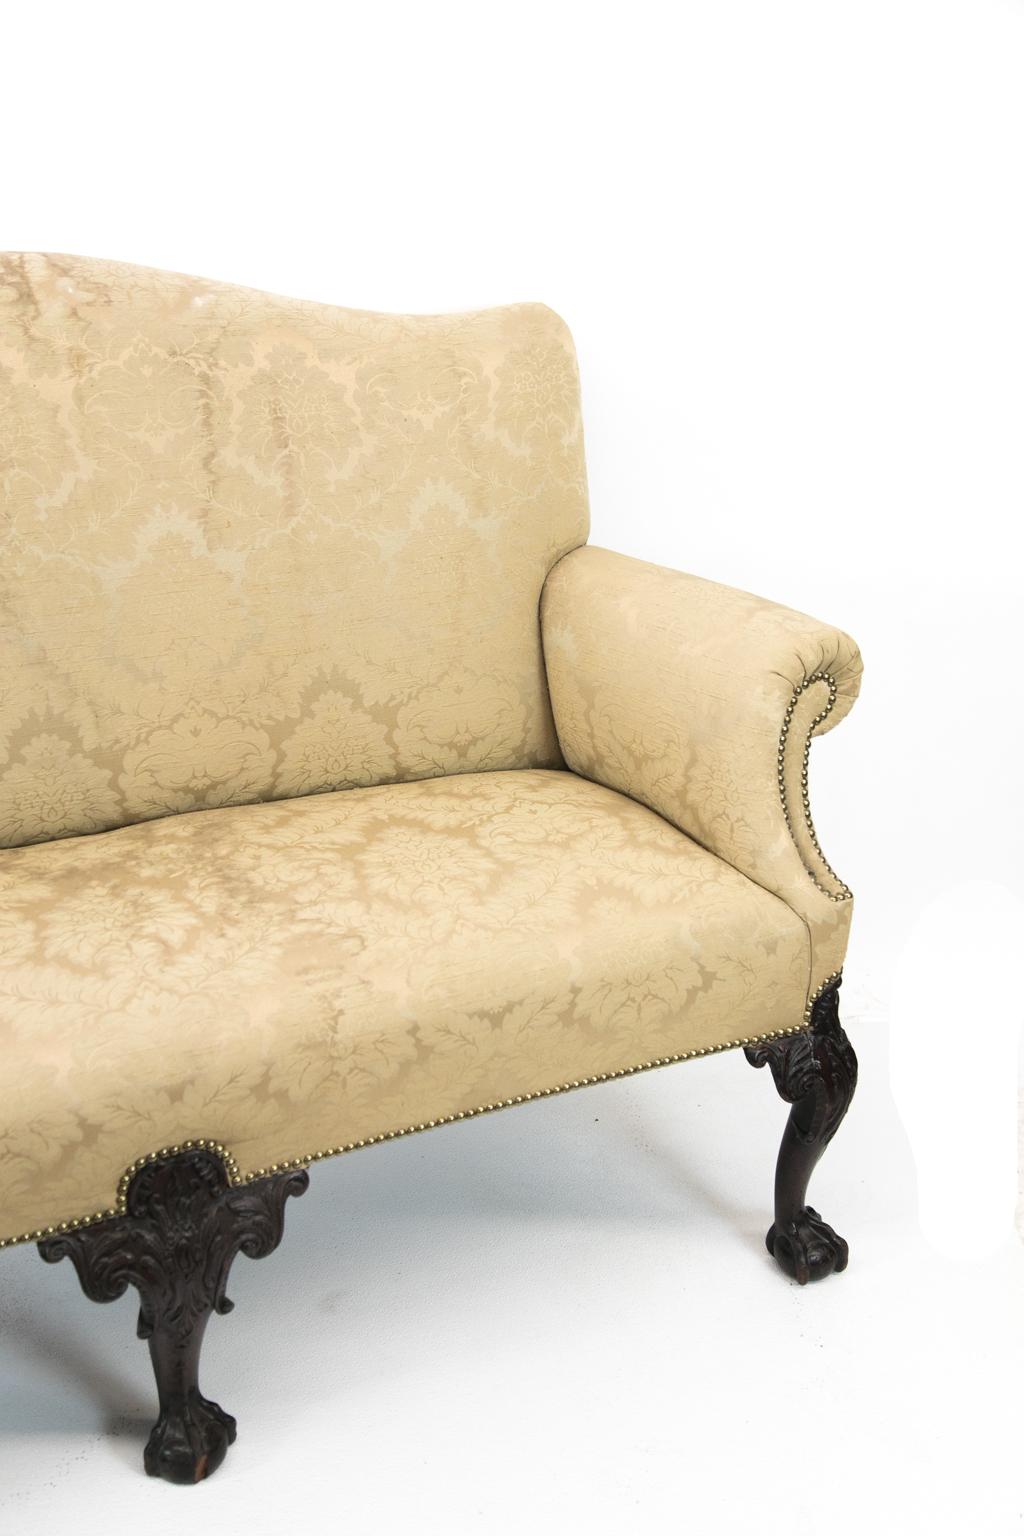 Late 19th Century English Chippendale Style Upholstered Settee